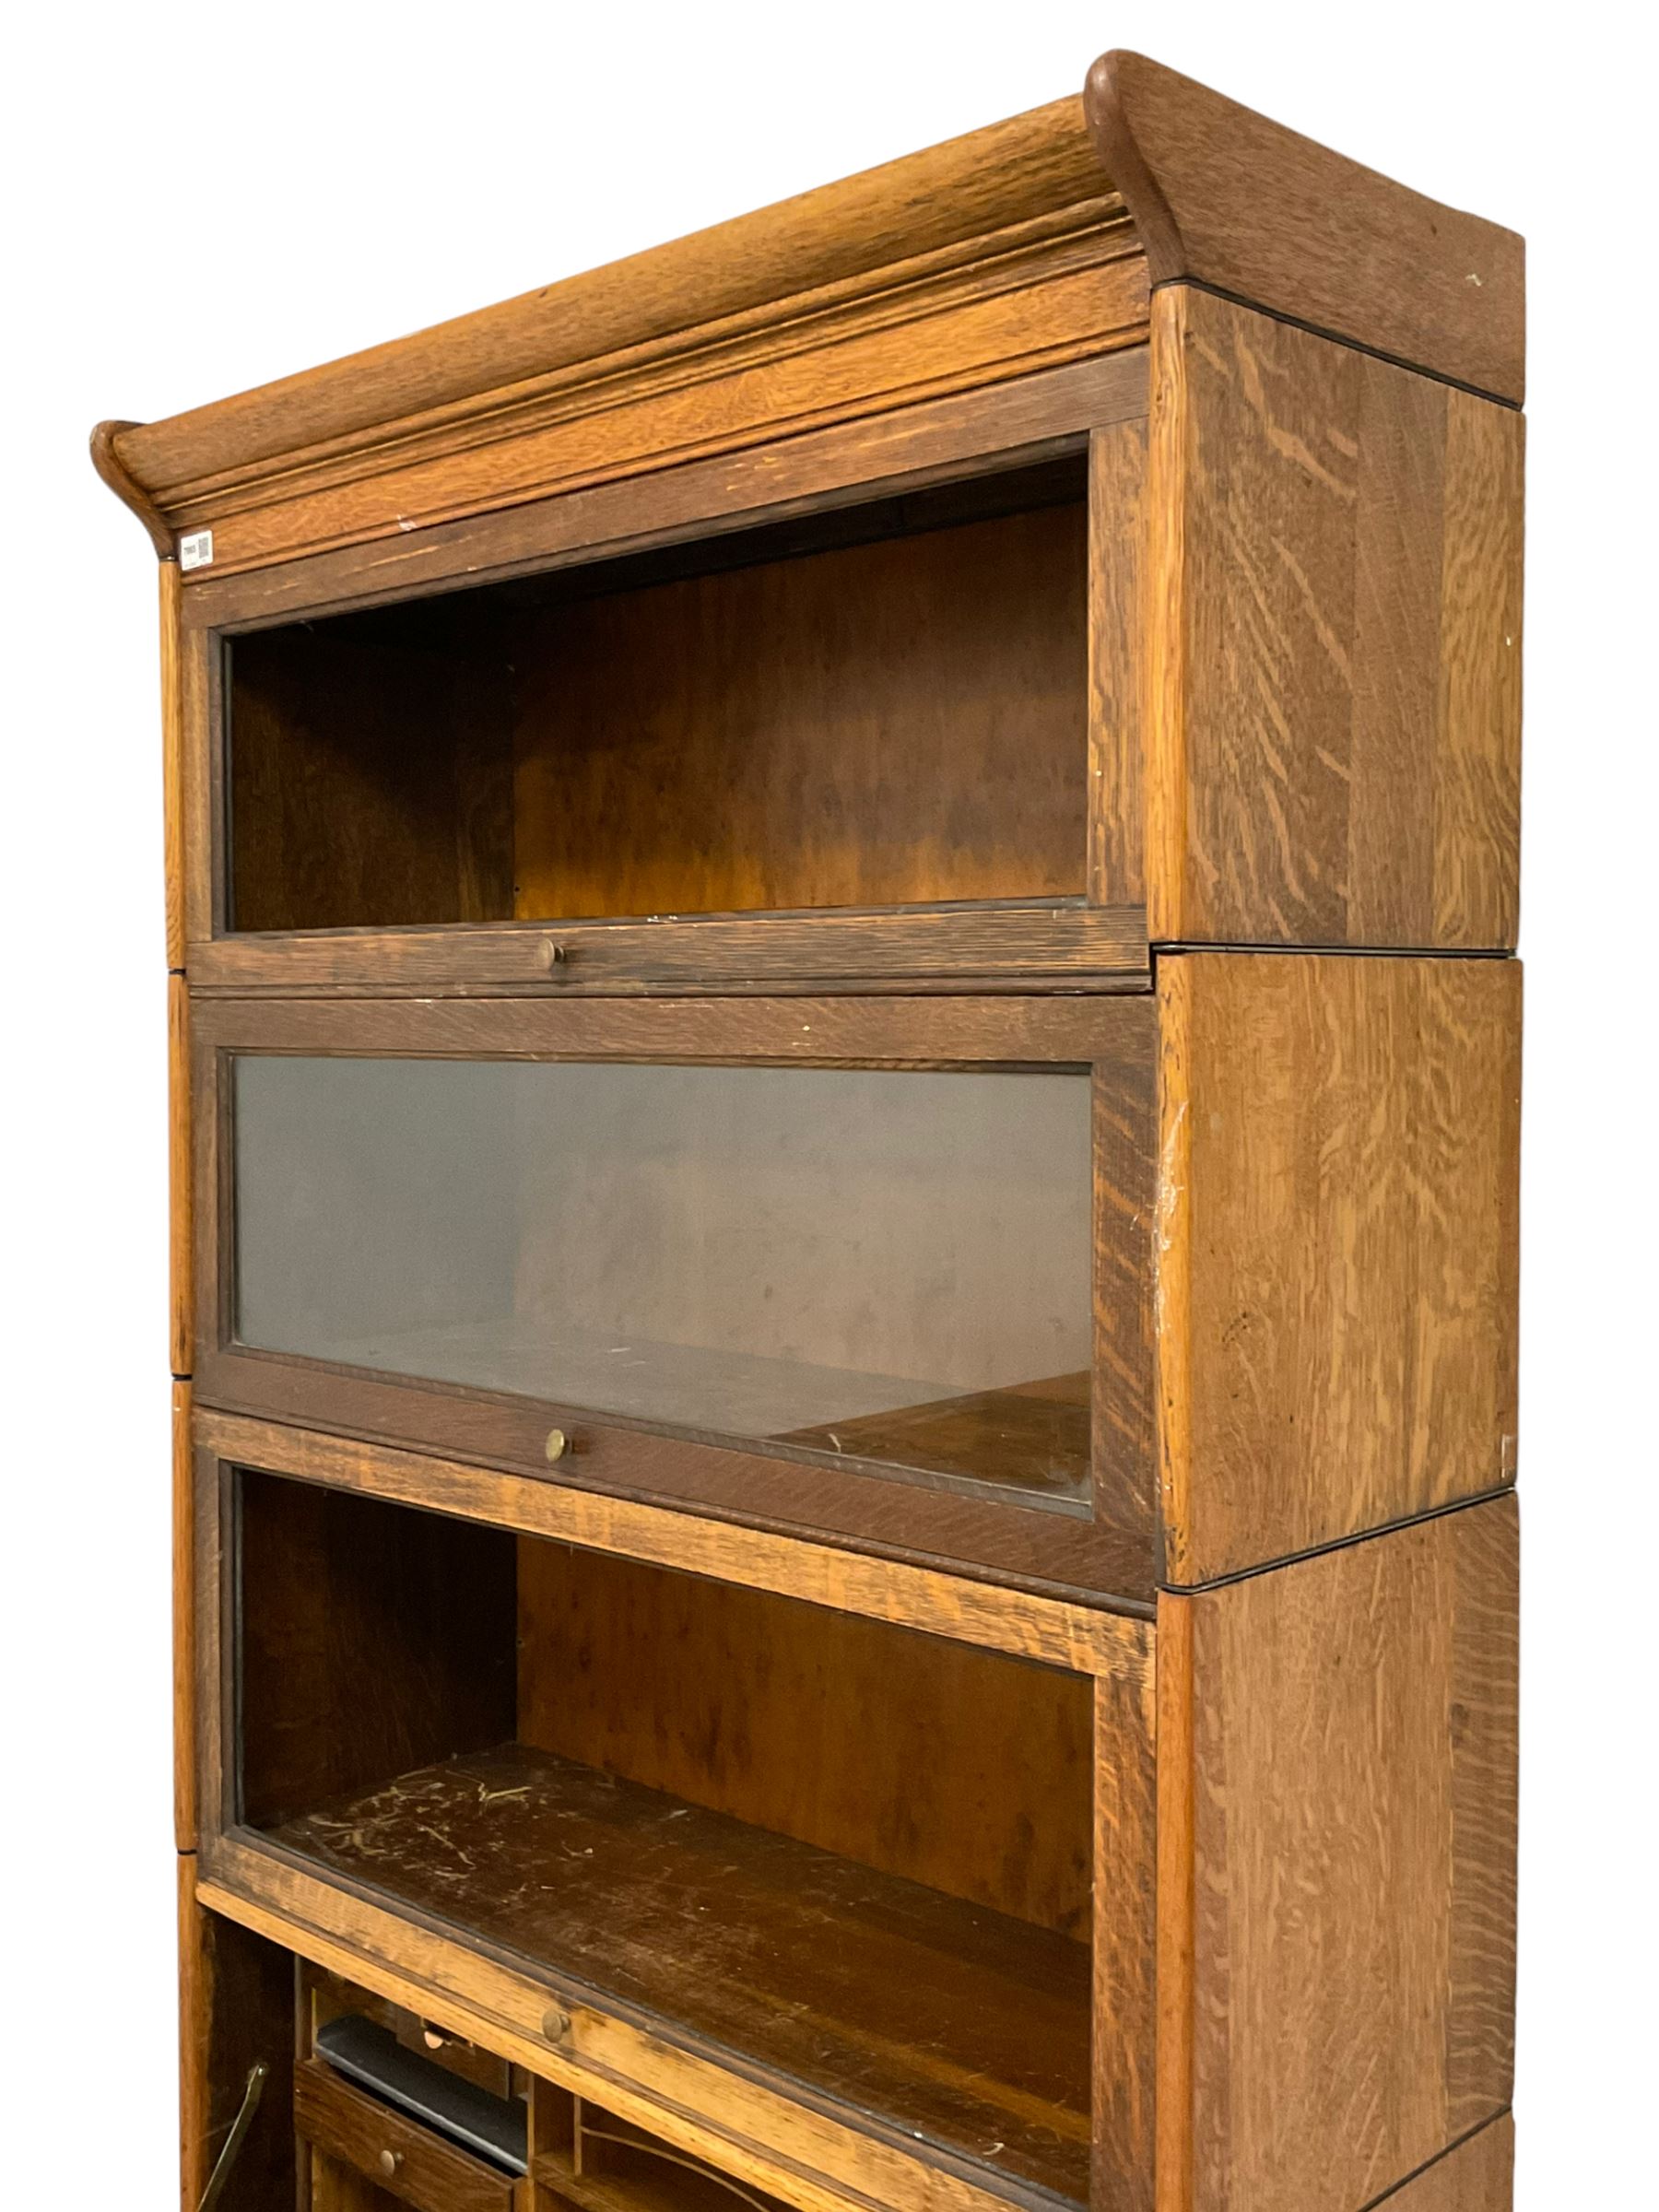 Early to mid-20th century five sectional stacking library bookcase - Image 3 of 7